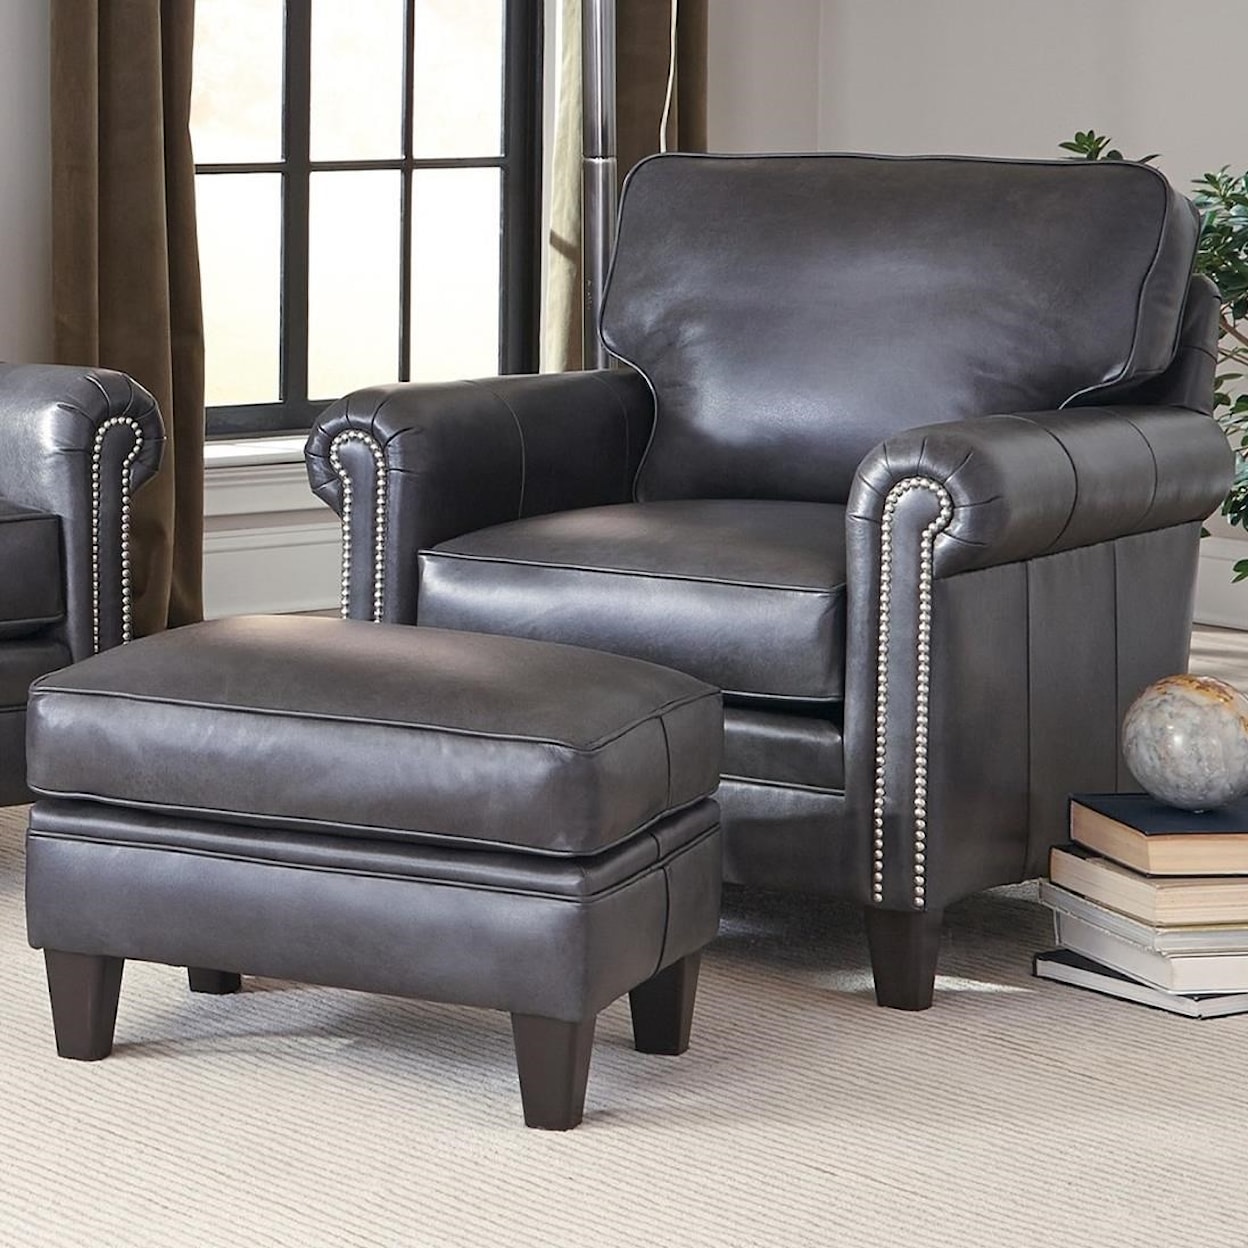 Smith Brothers 234 Chair and Ottoman Set